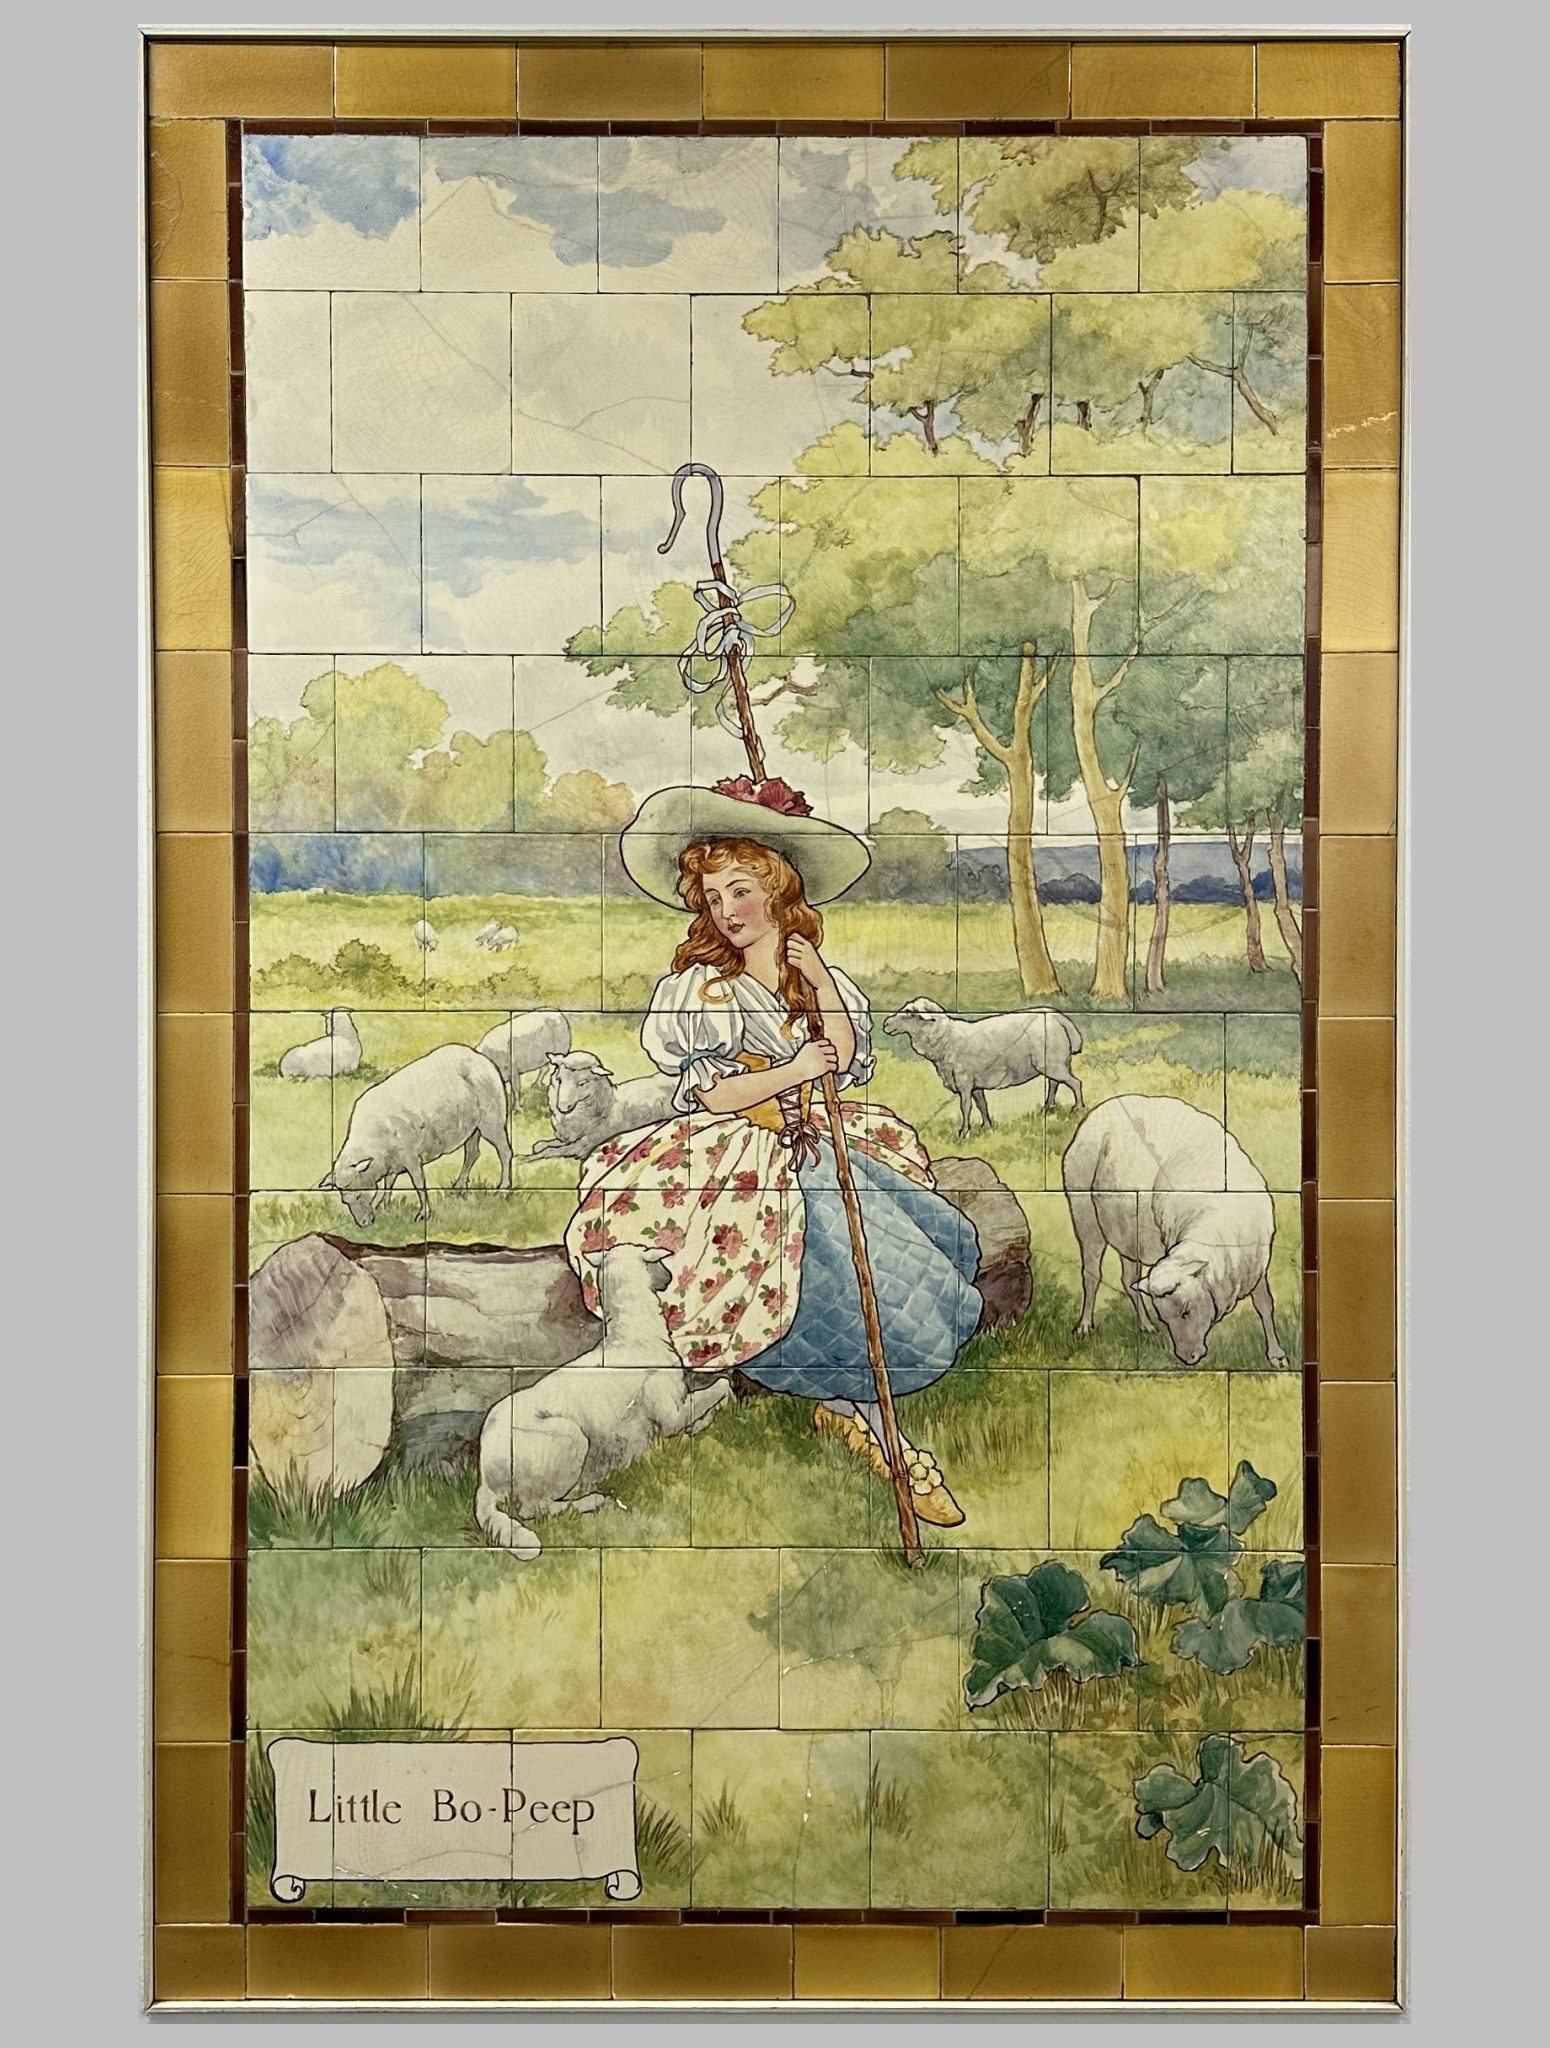 Little Bo Peep nursery rhyme fairy tale scene painted on Doulton tiles (commissioned around 1900) from the Evelina Children's Hospital displayed in the long corridor at St Thomas' hospital.